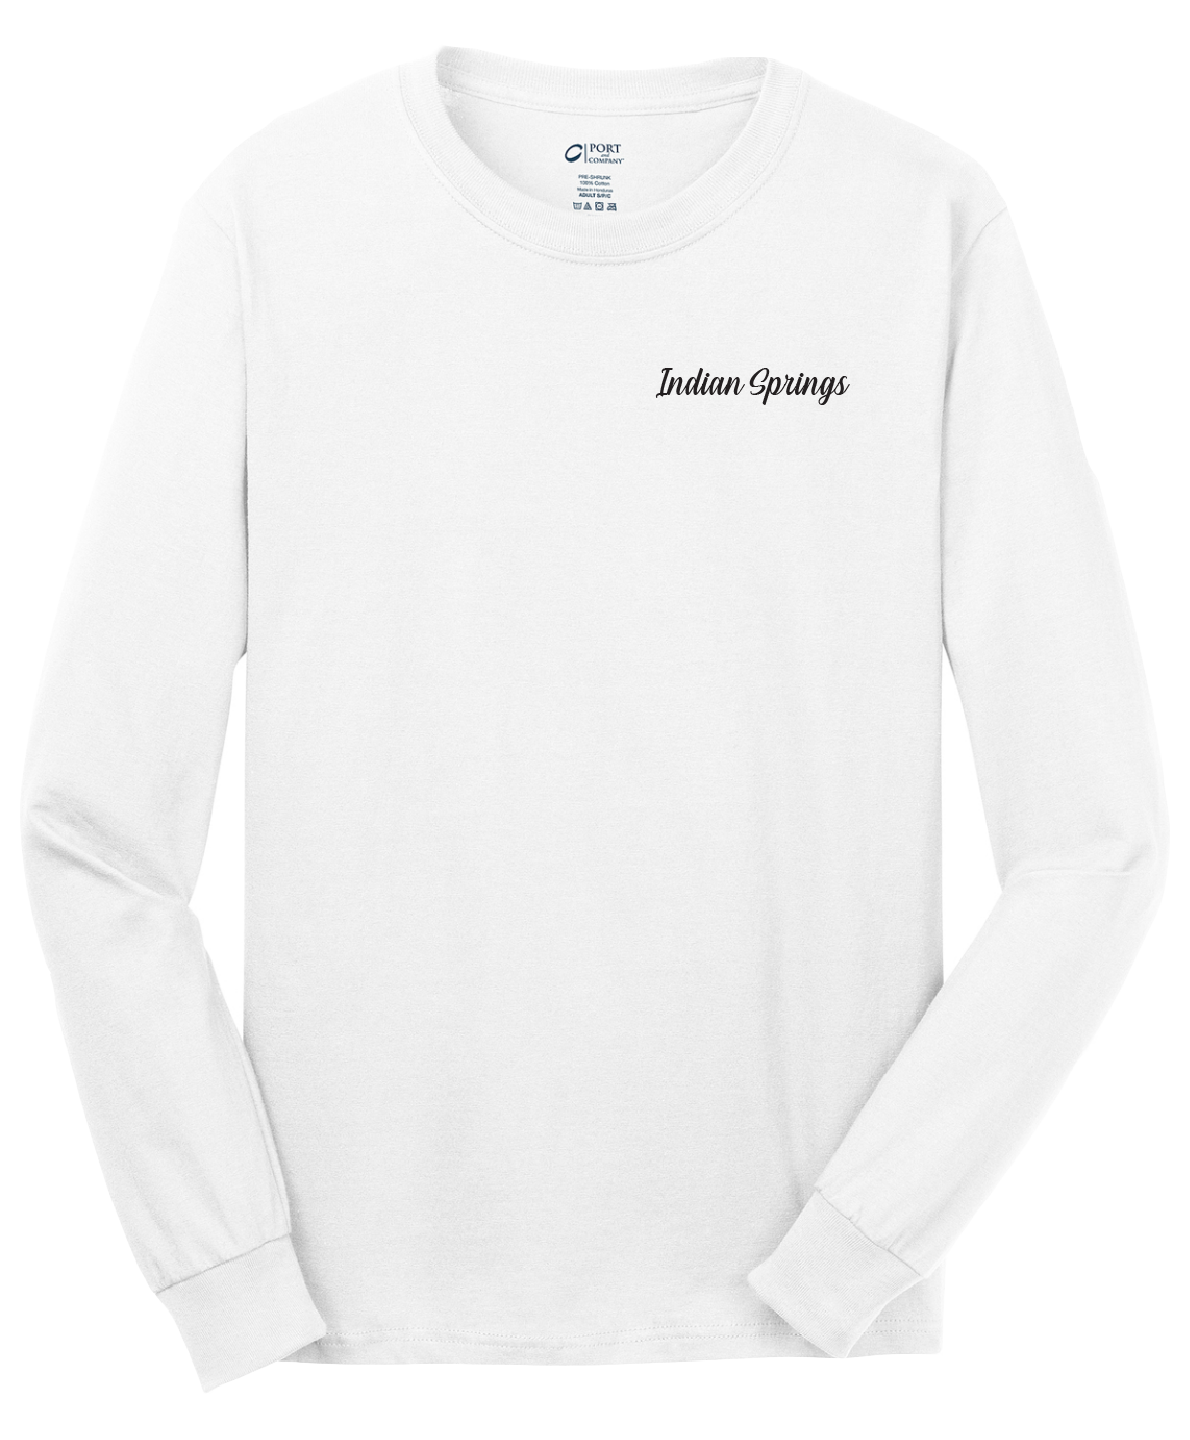 Indian Springs - Mens - Port & Company® - Long Sleeve Core Cotton Tee